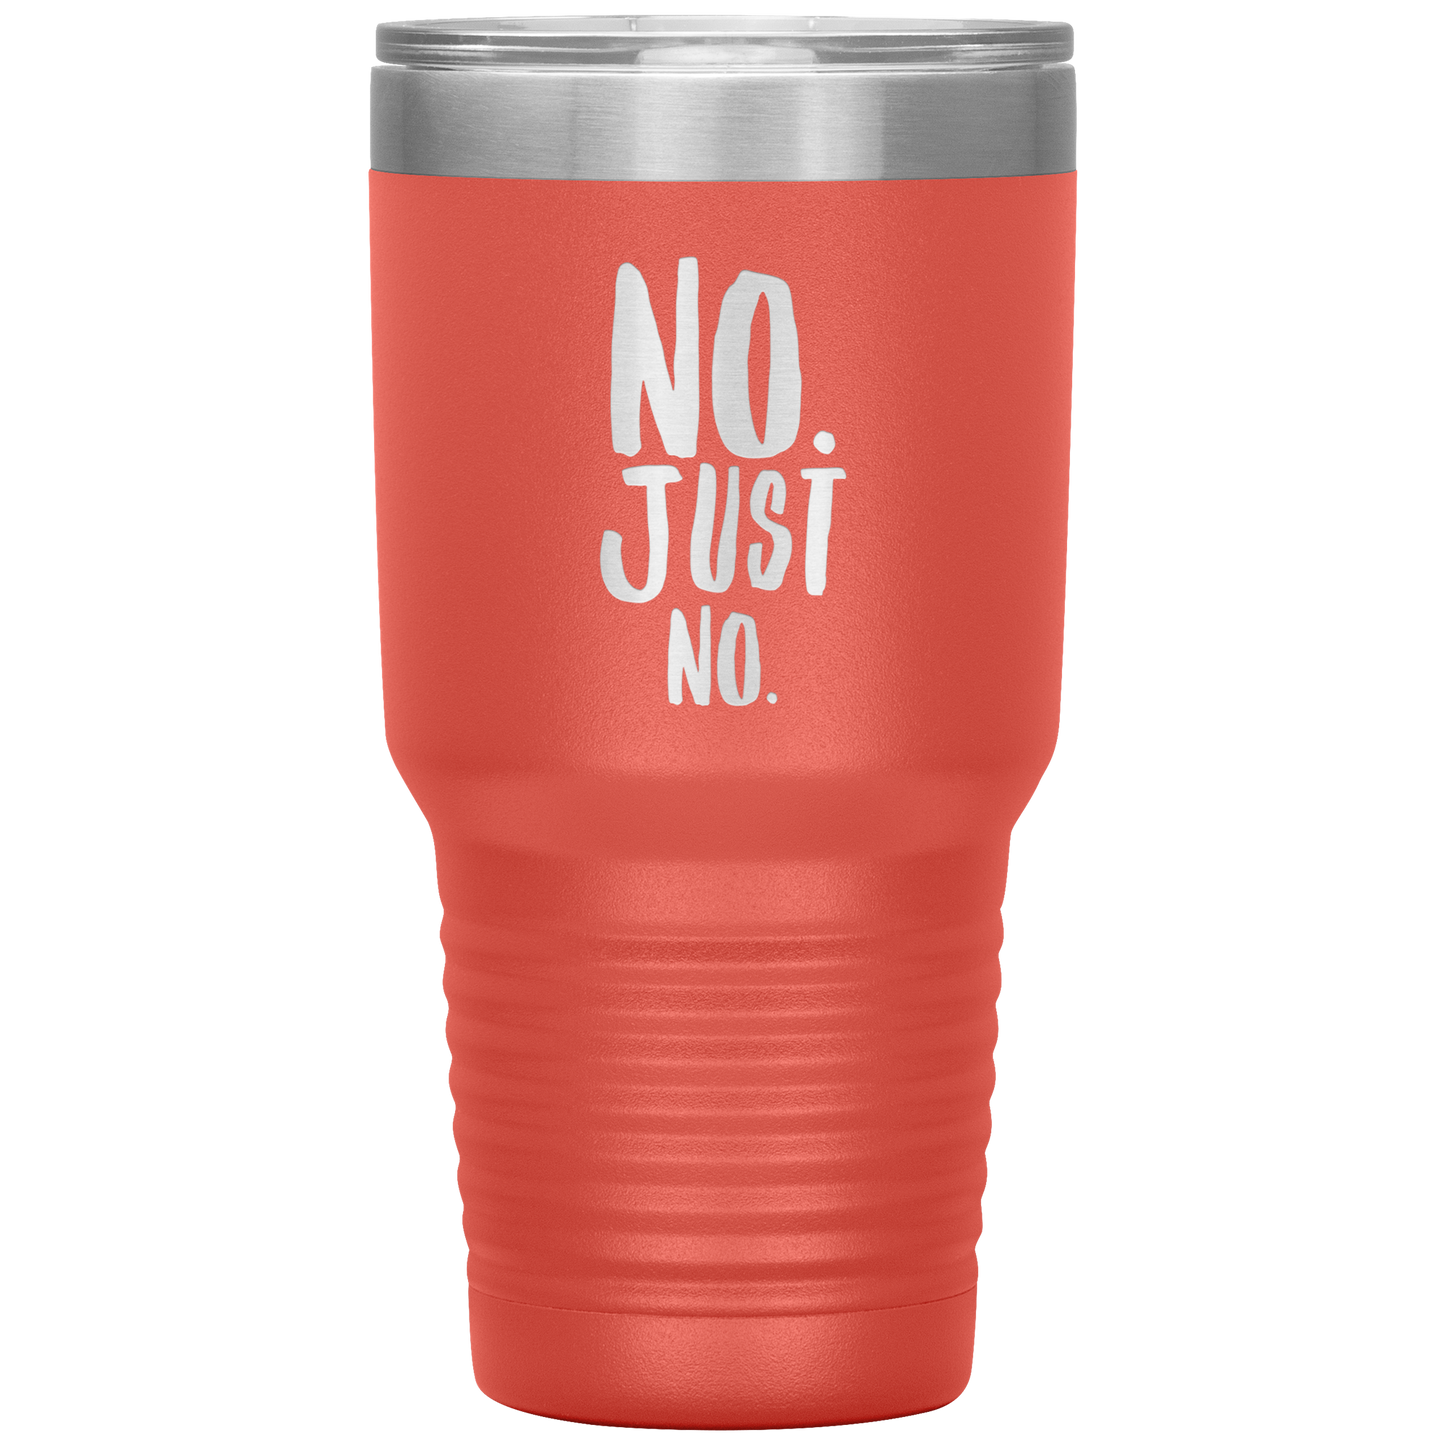 "No. Just No." 30 oz. Insulated Stainless Steel Insulated Travel Coffee Cup with Lid